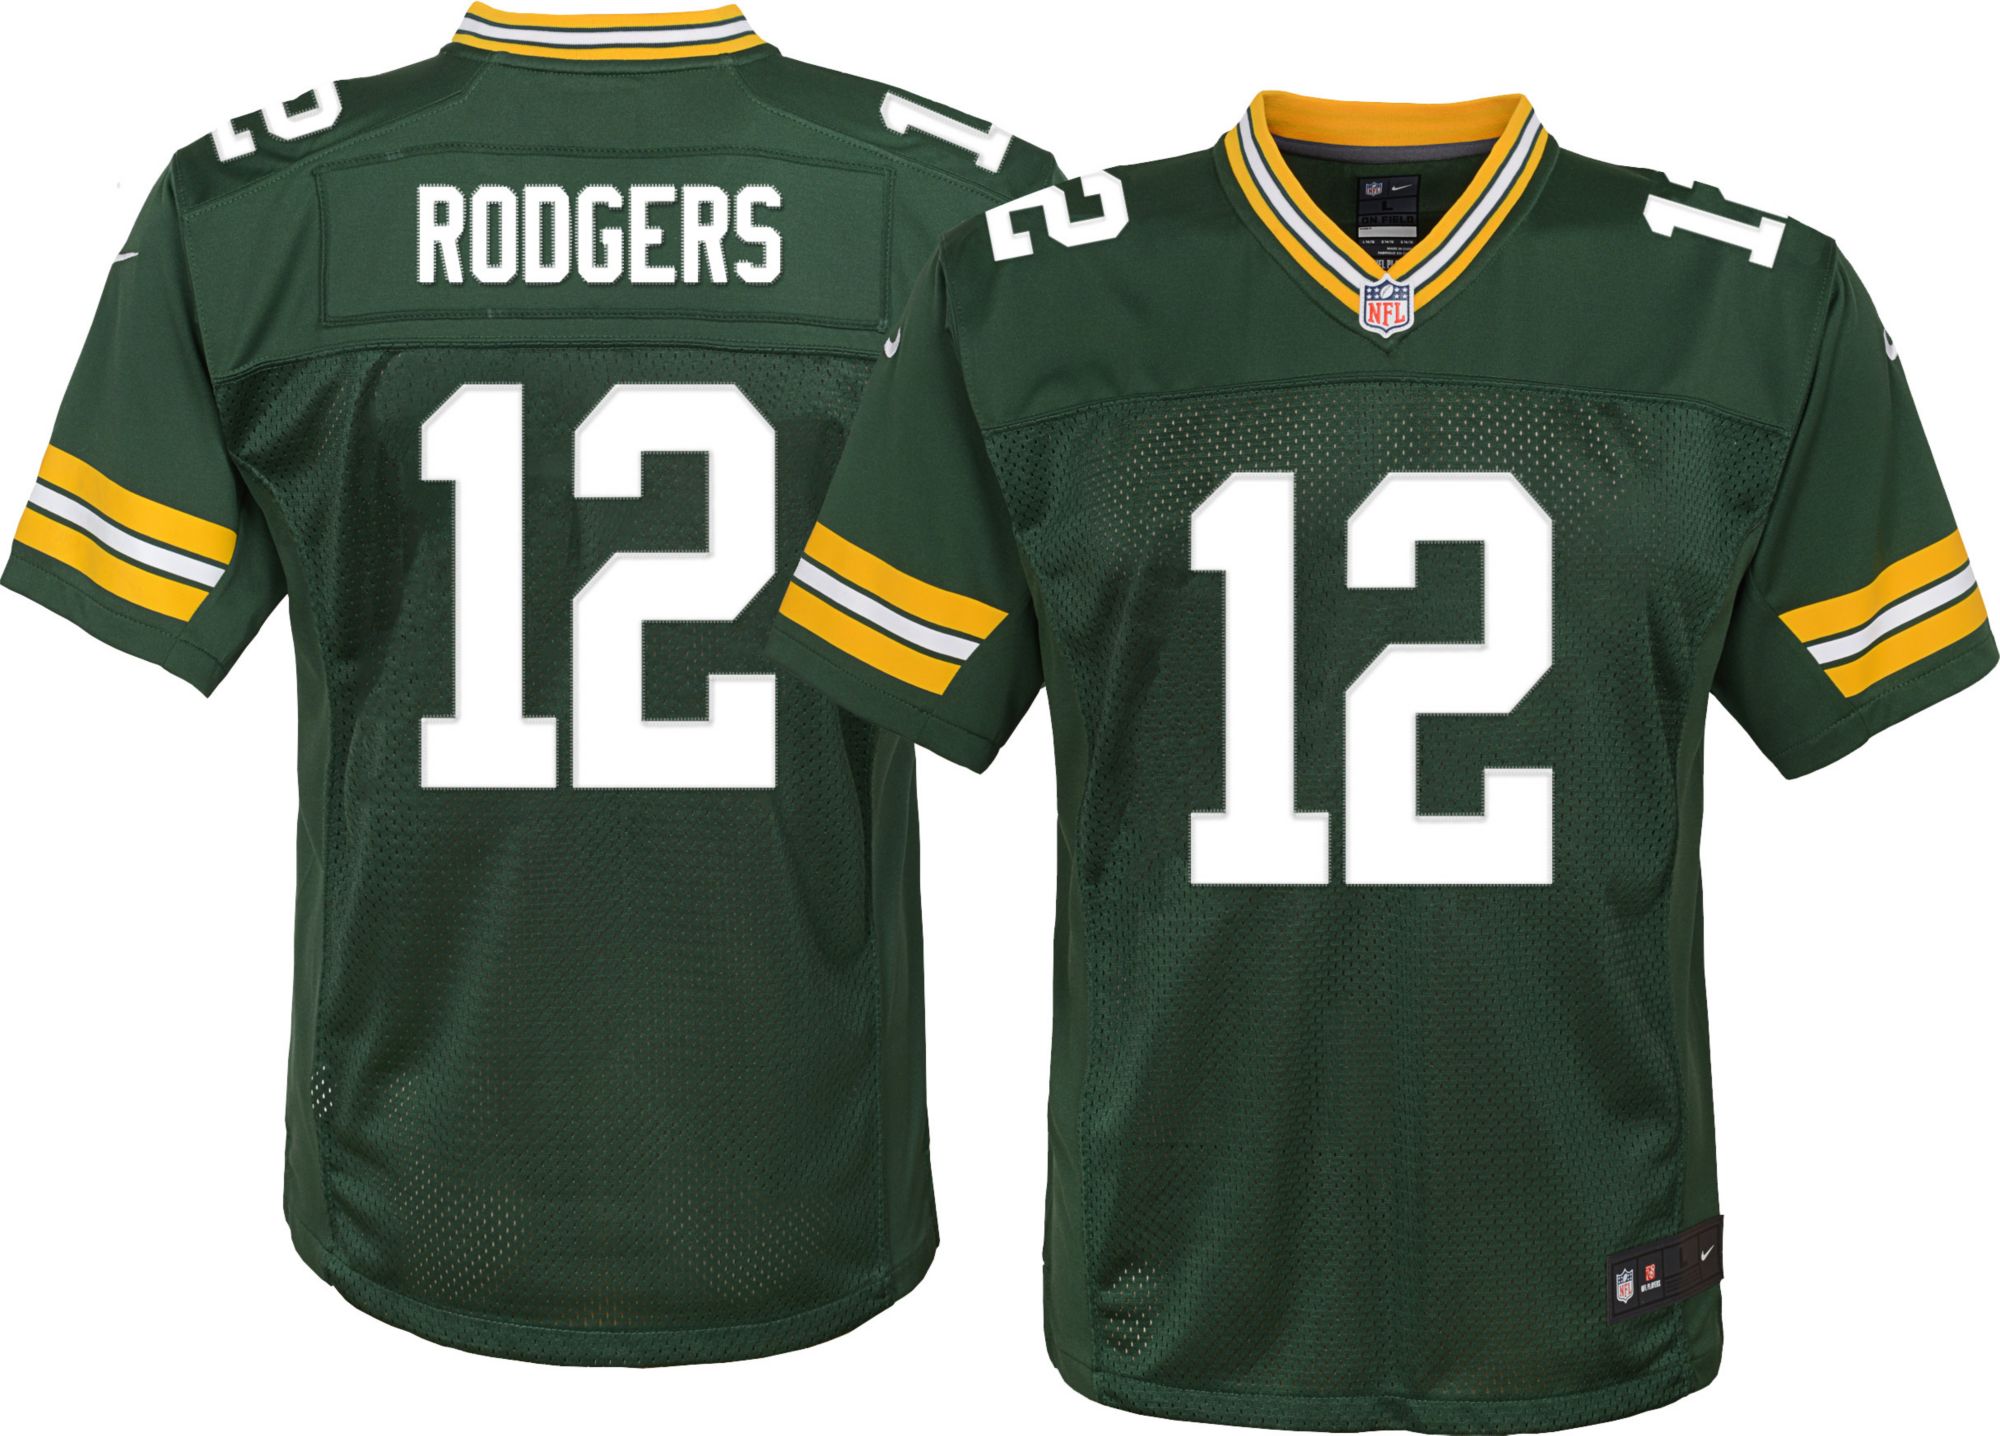 2t aaron rodgers jersey